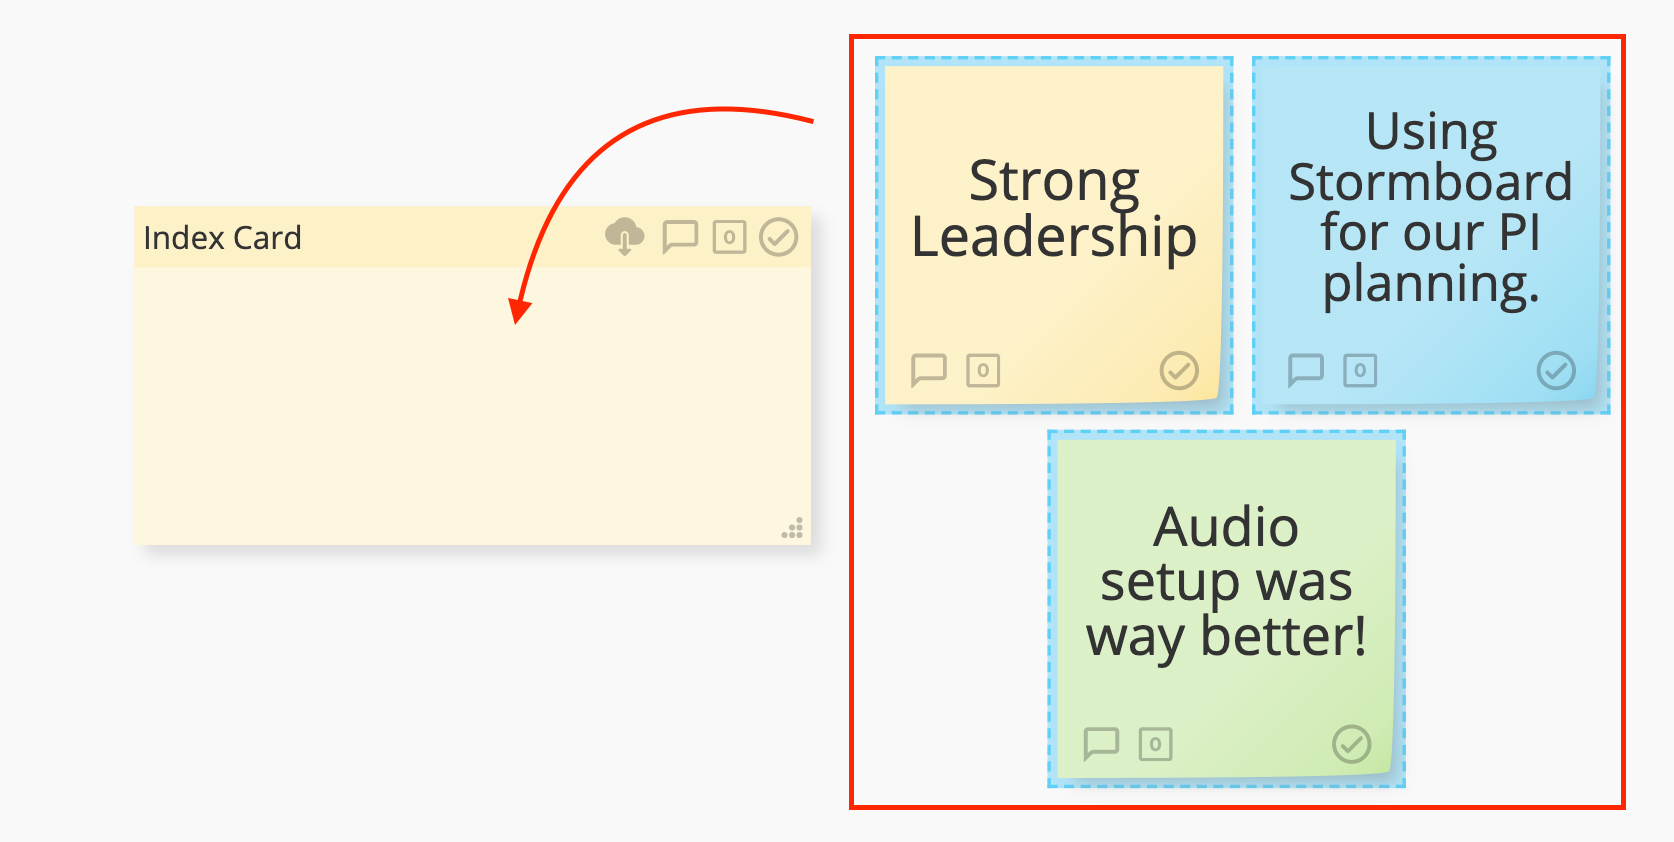 Adding multiple stickies within a Substorm